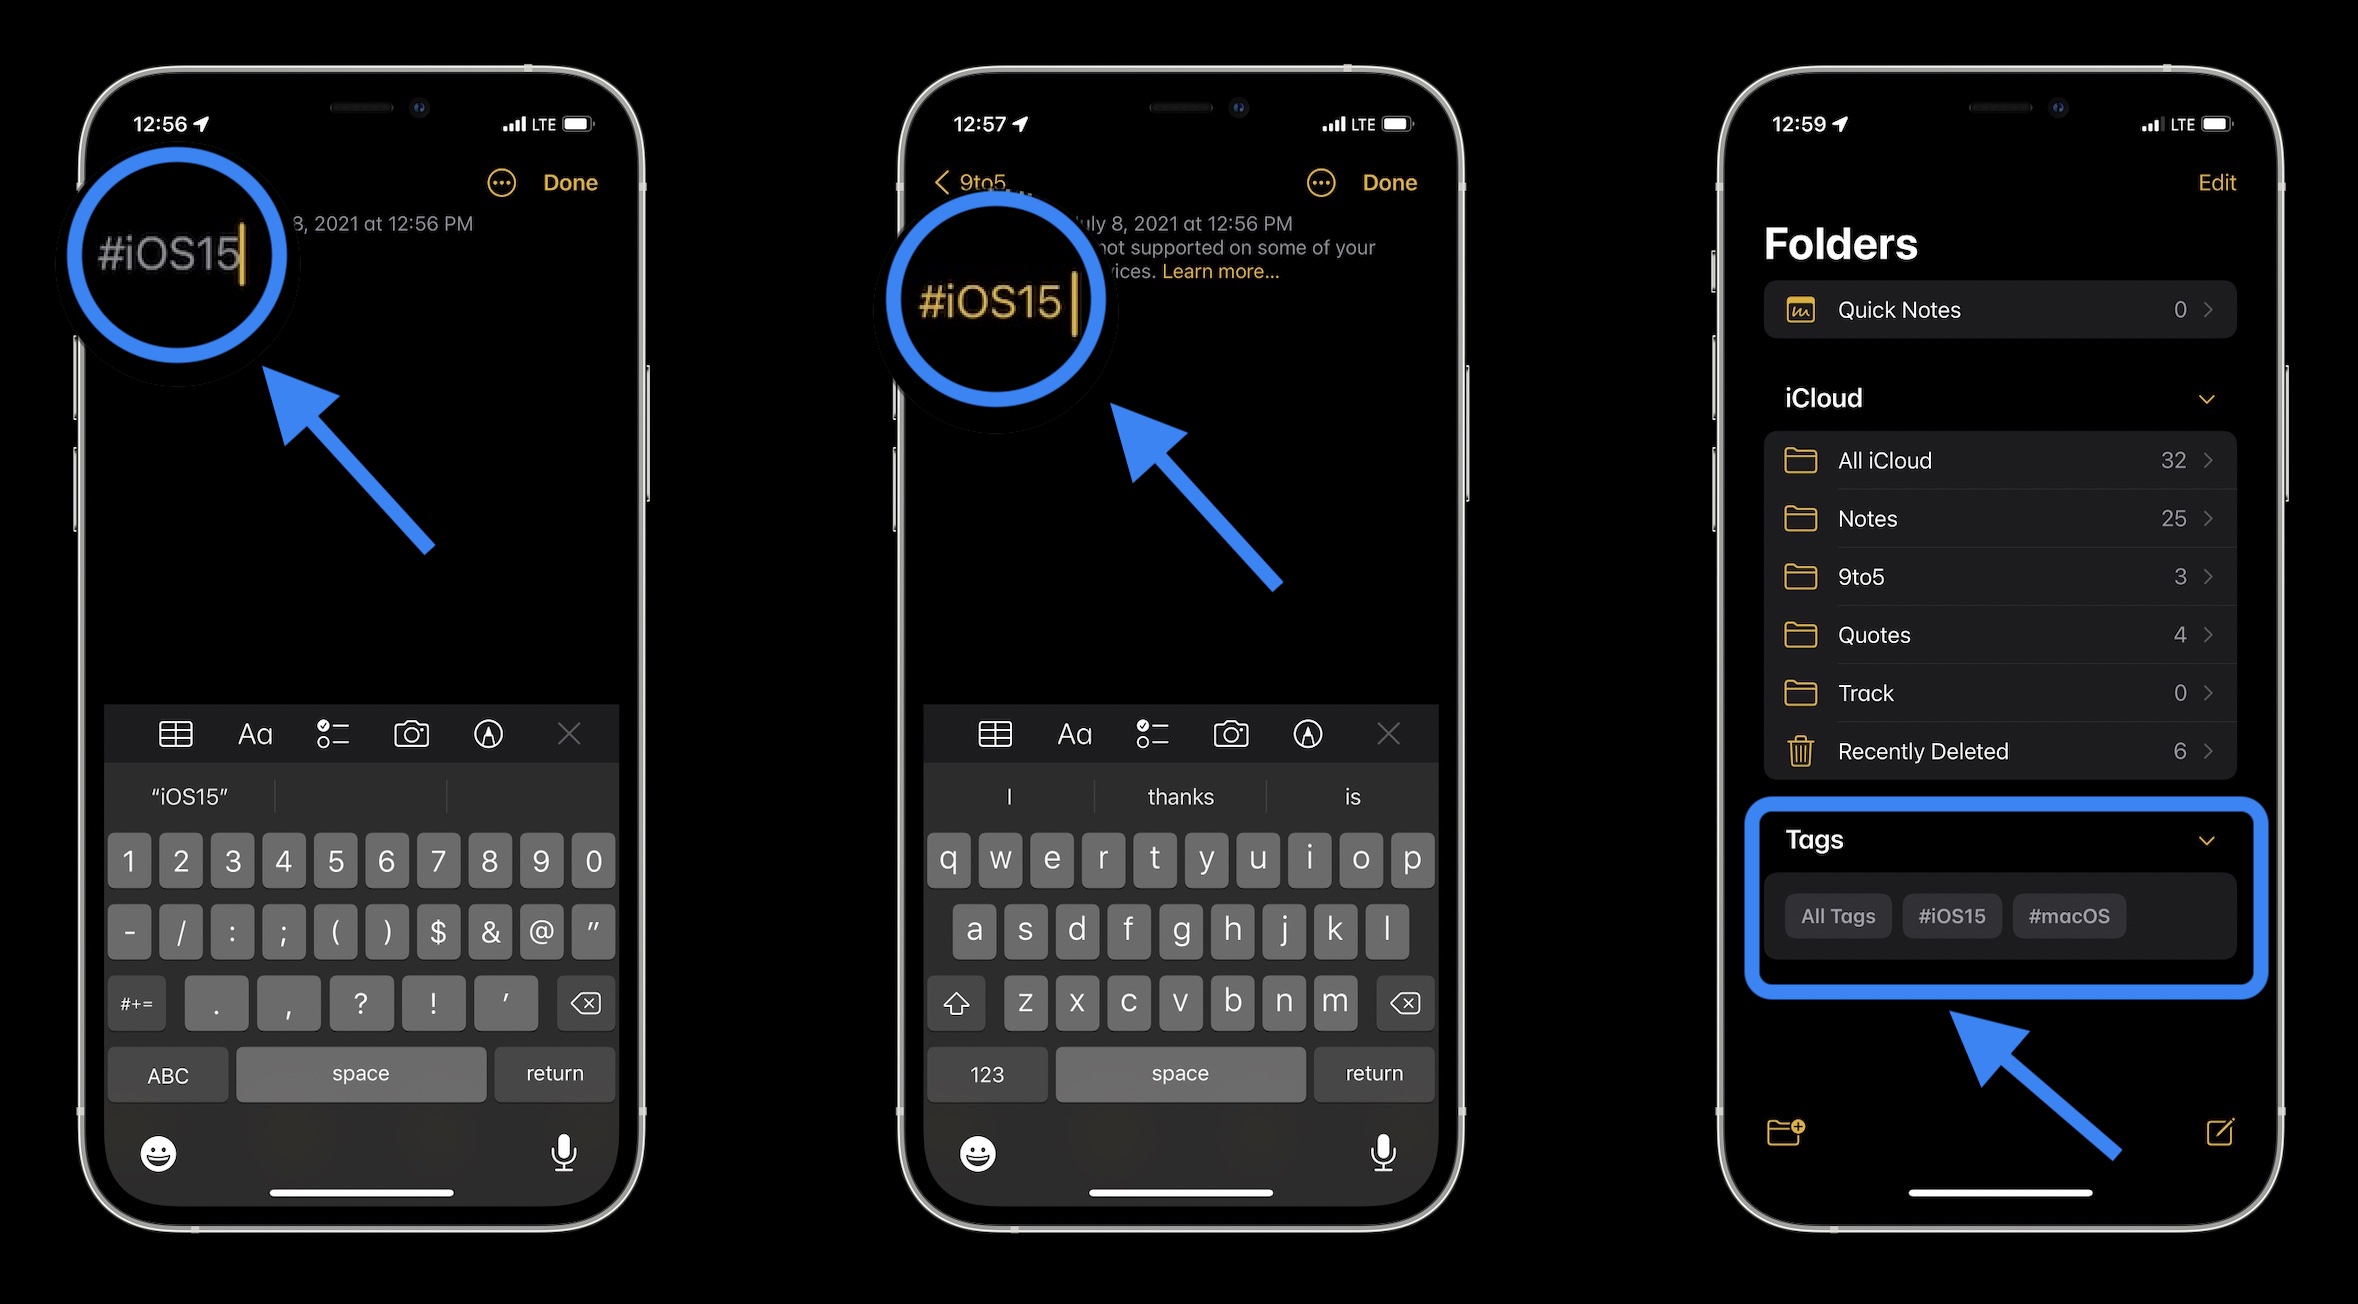 Hands-on: iOS 15 upgrades the Notes app with support for tags; here’s how they work